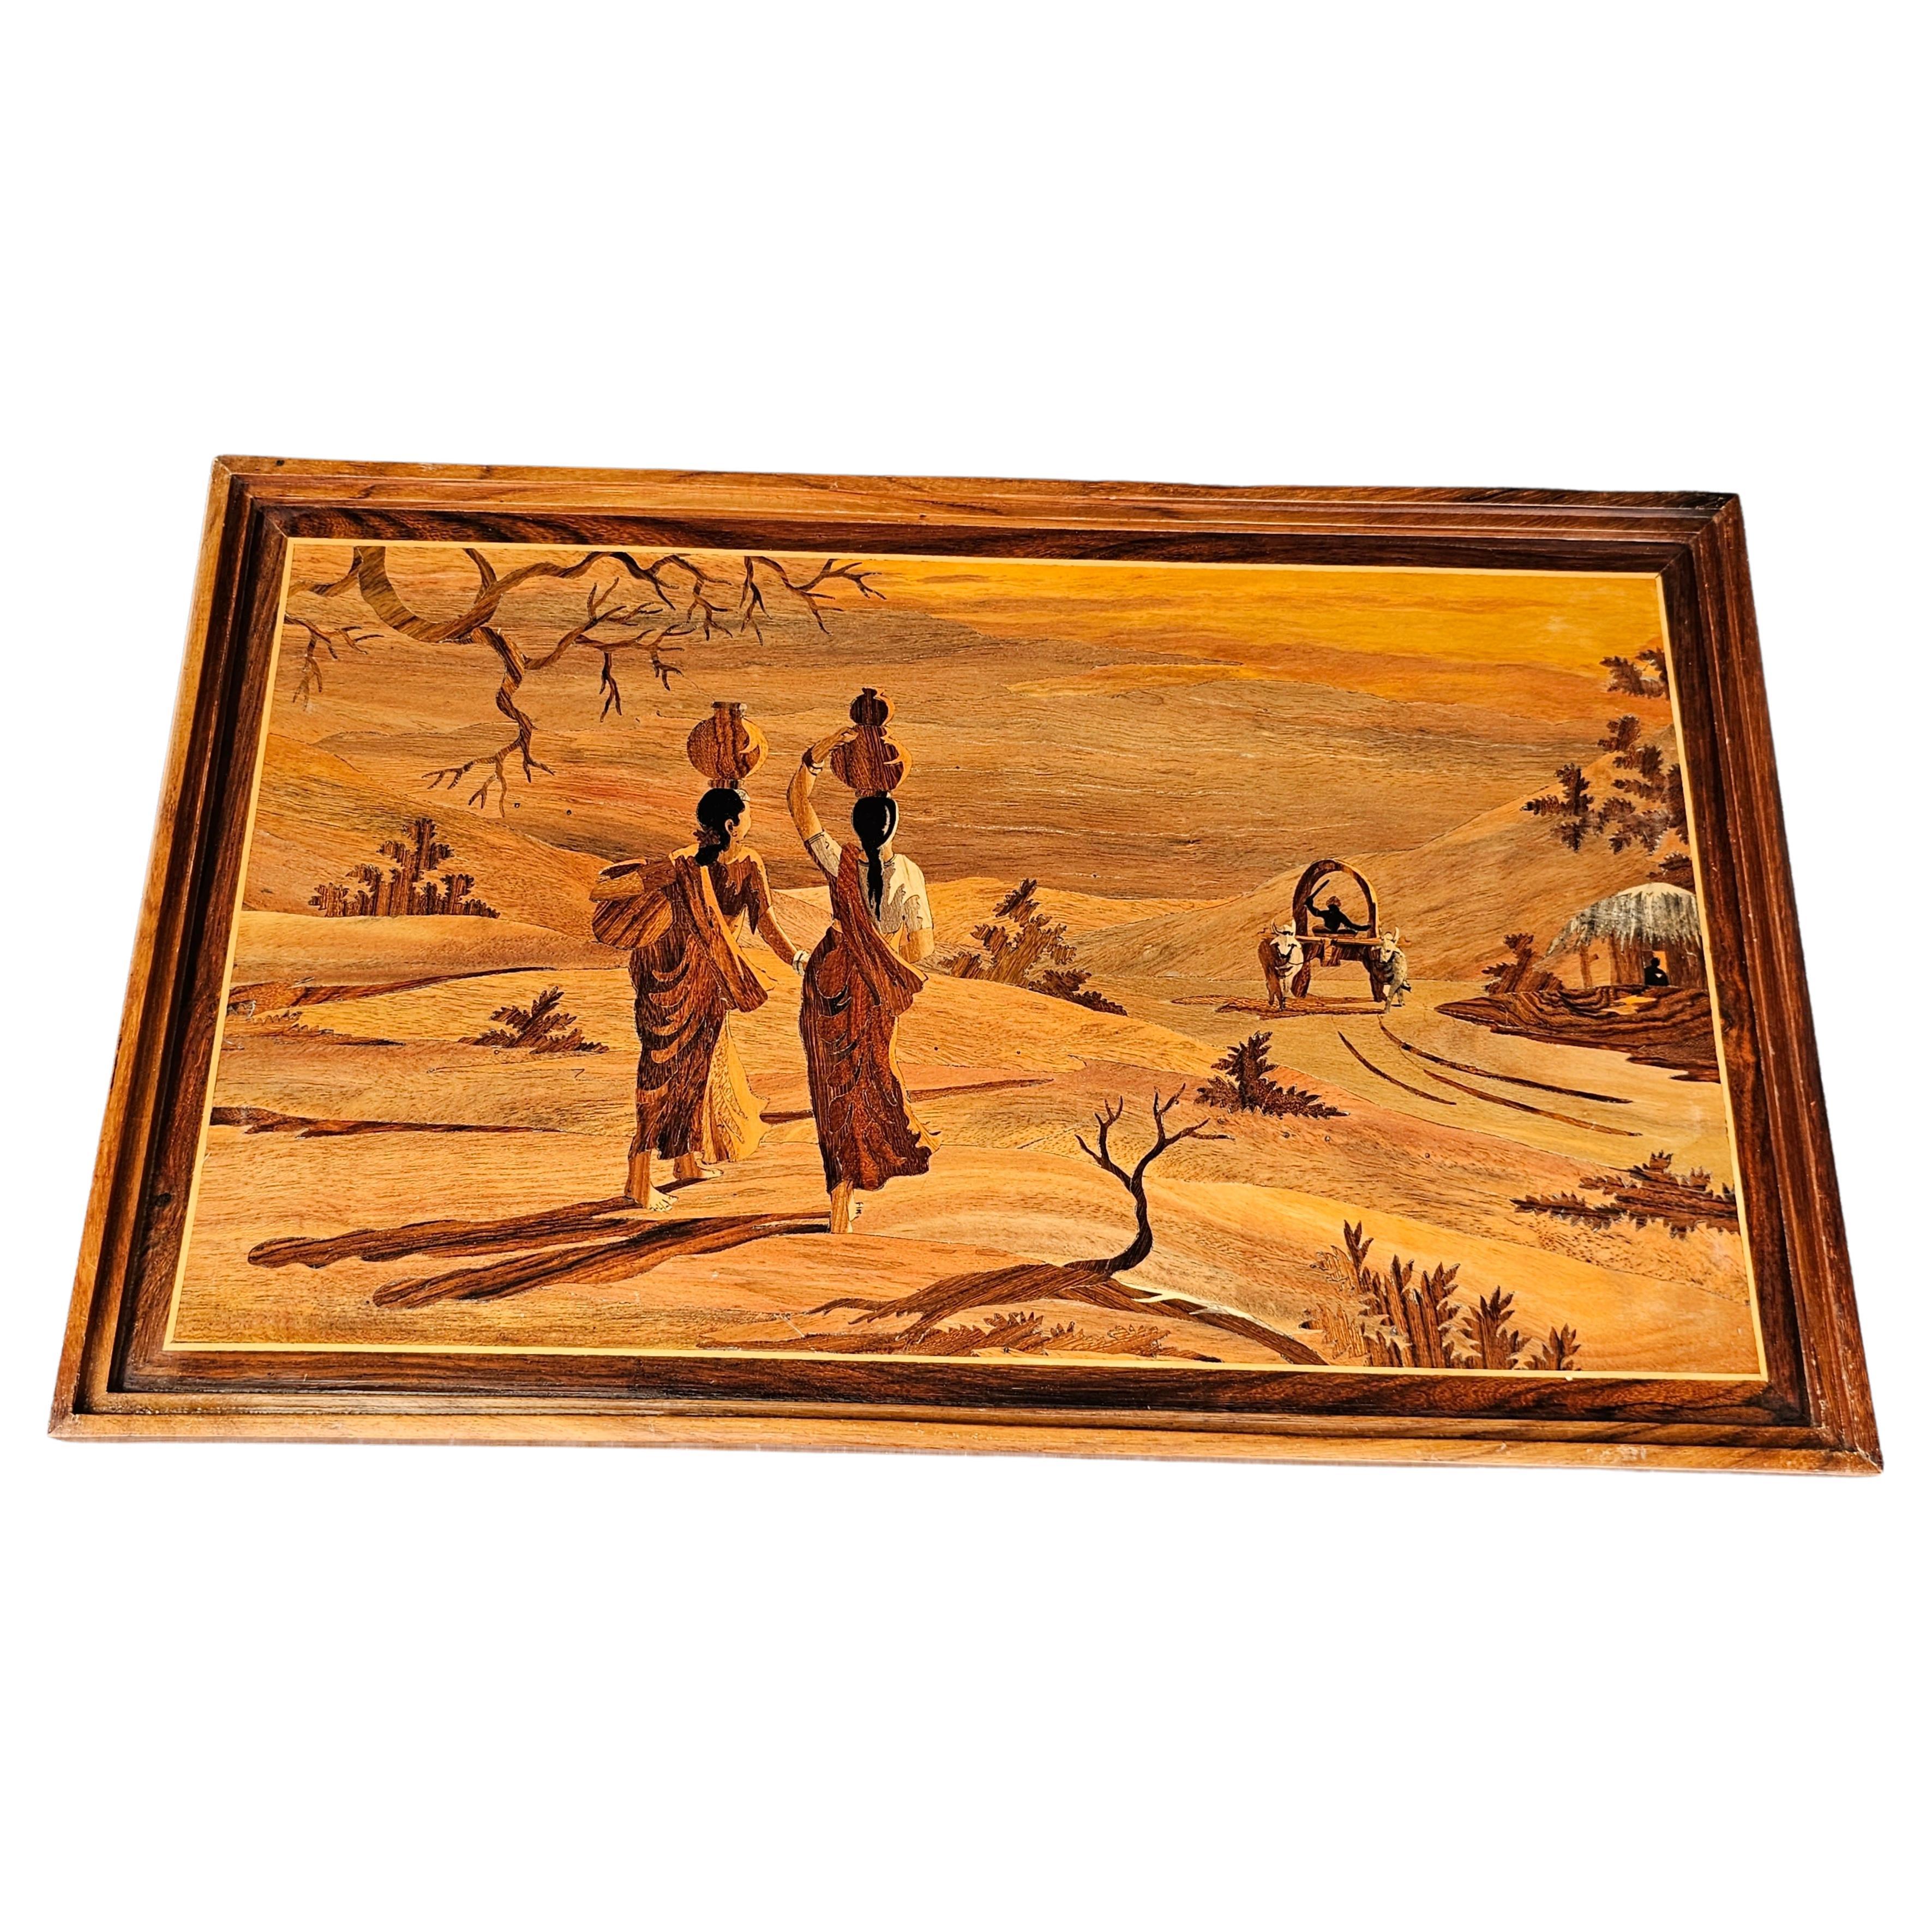 20th Century Fine Wood Marquetry Decorative Hanging Wall Panel